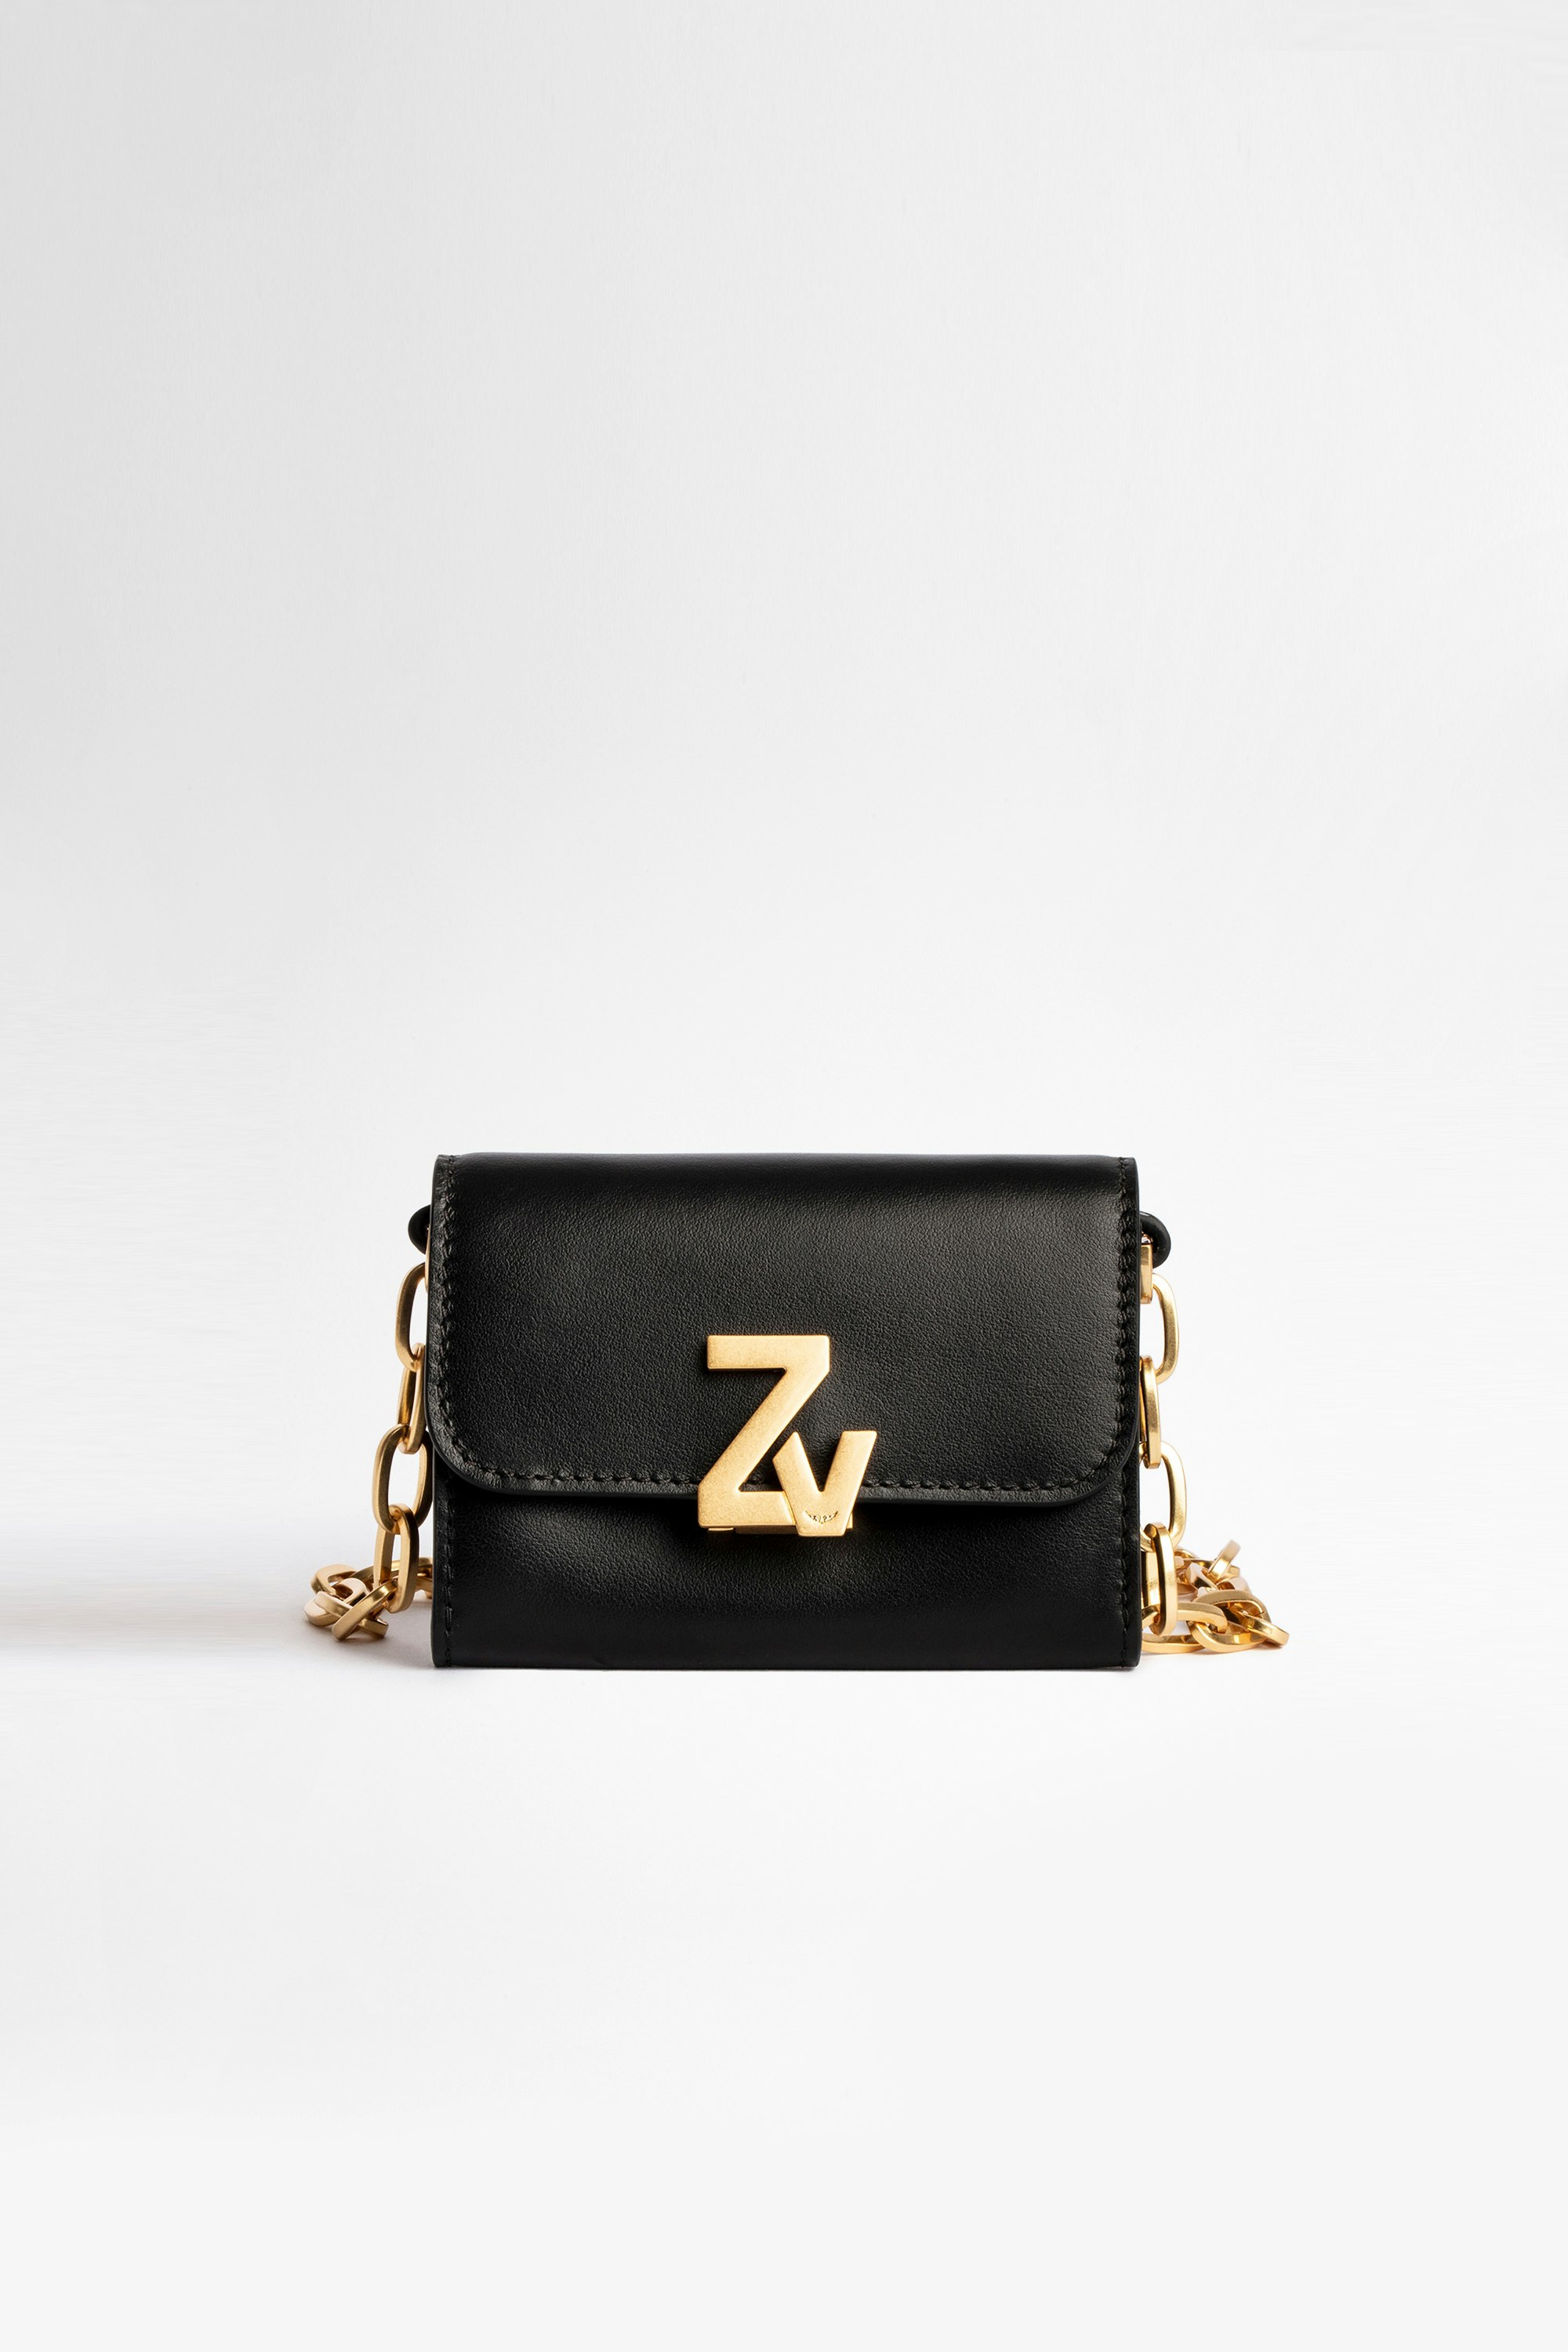 ZV Initiale Le Tiny Unchained Wallet-Style Clutch Women's black ZV Initiale black leather wallet